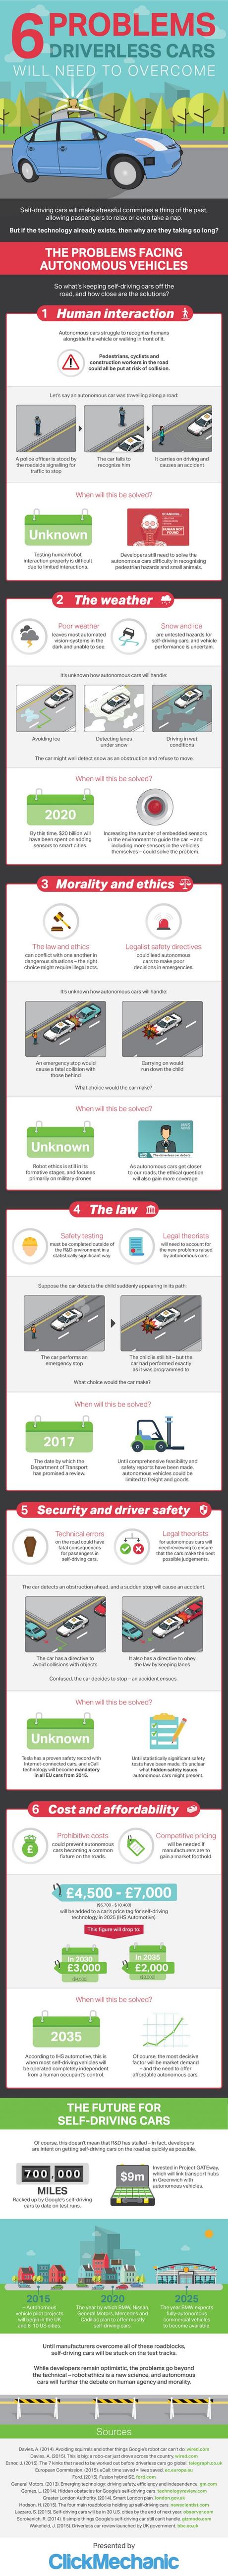 V2-6-problems-driverless-cars-infographic